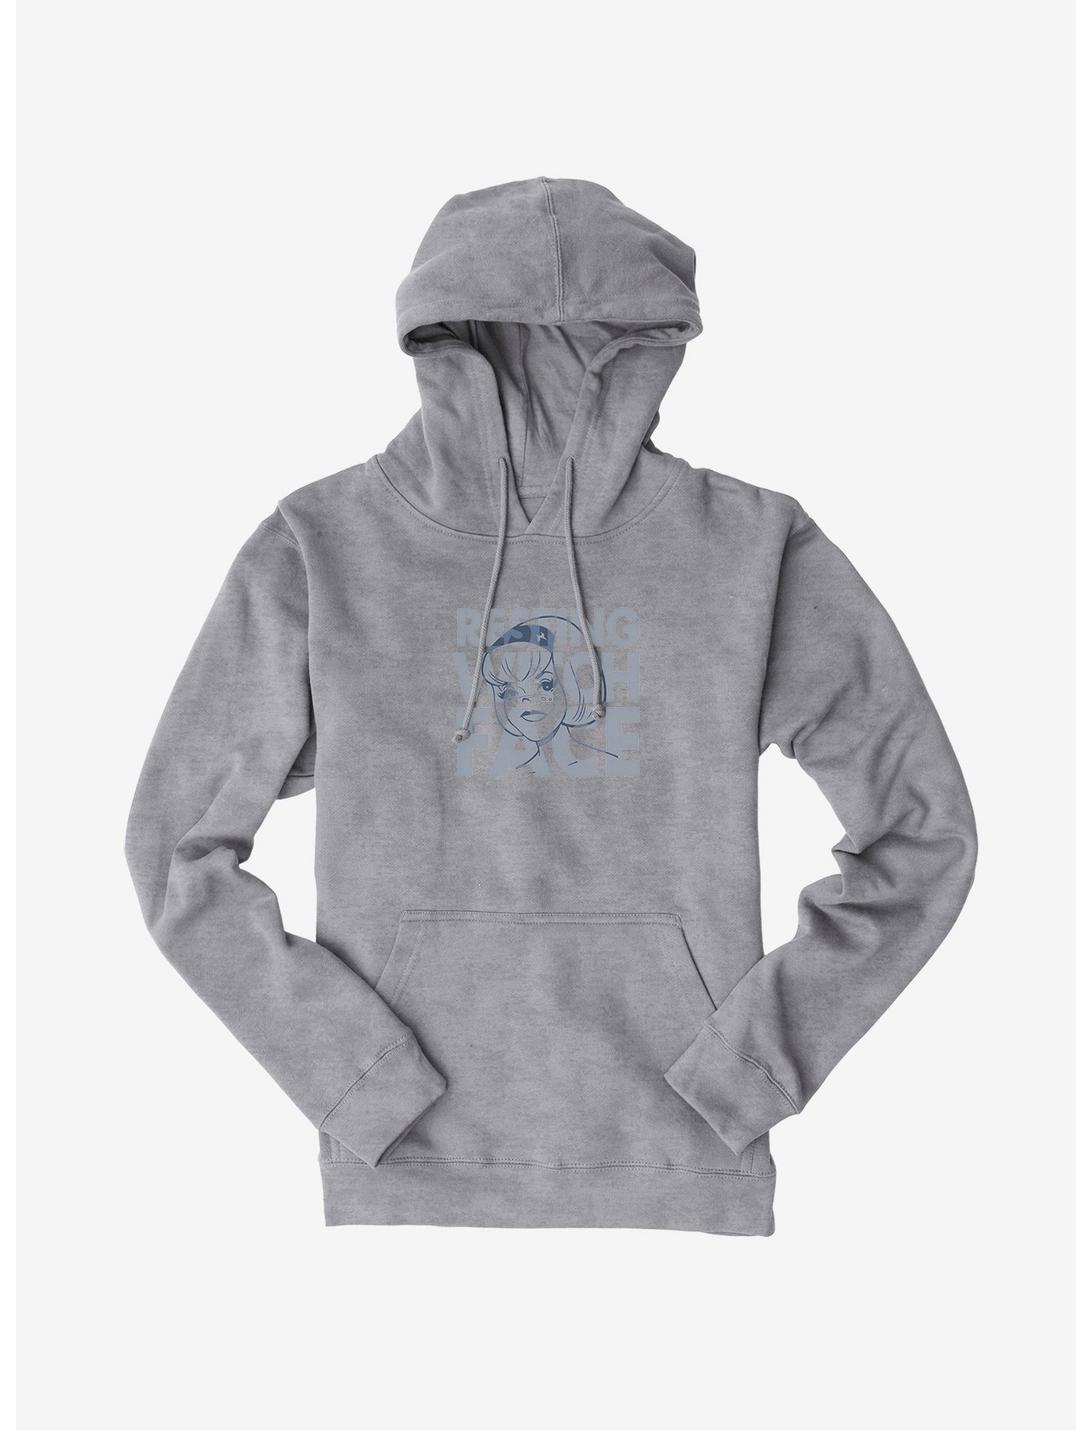 Archie Comics Chilling Adventures of Sabrina Resting Witch Face Hoodie, HEATHER GREY, hi-res